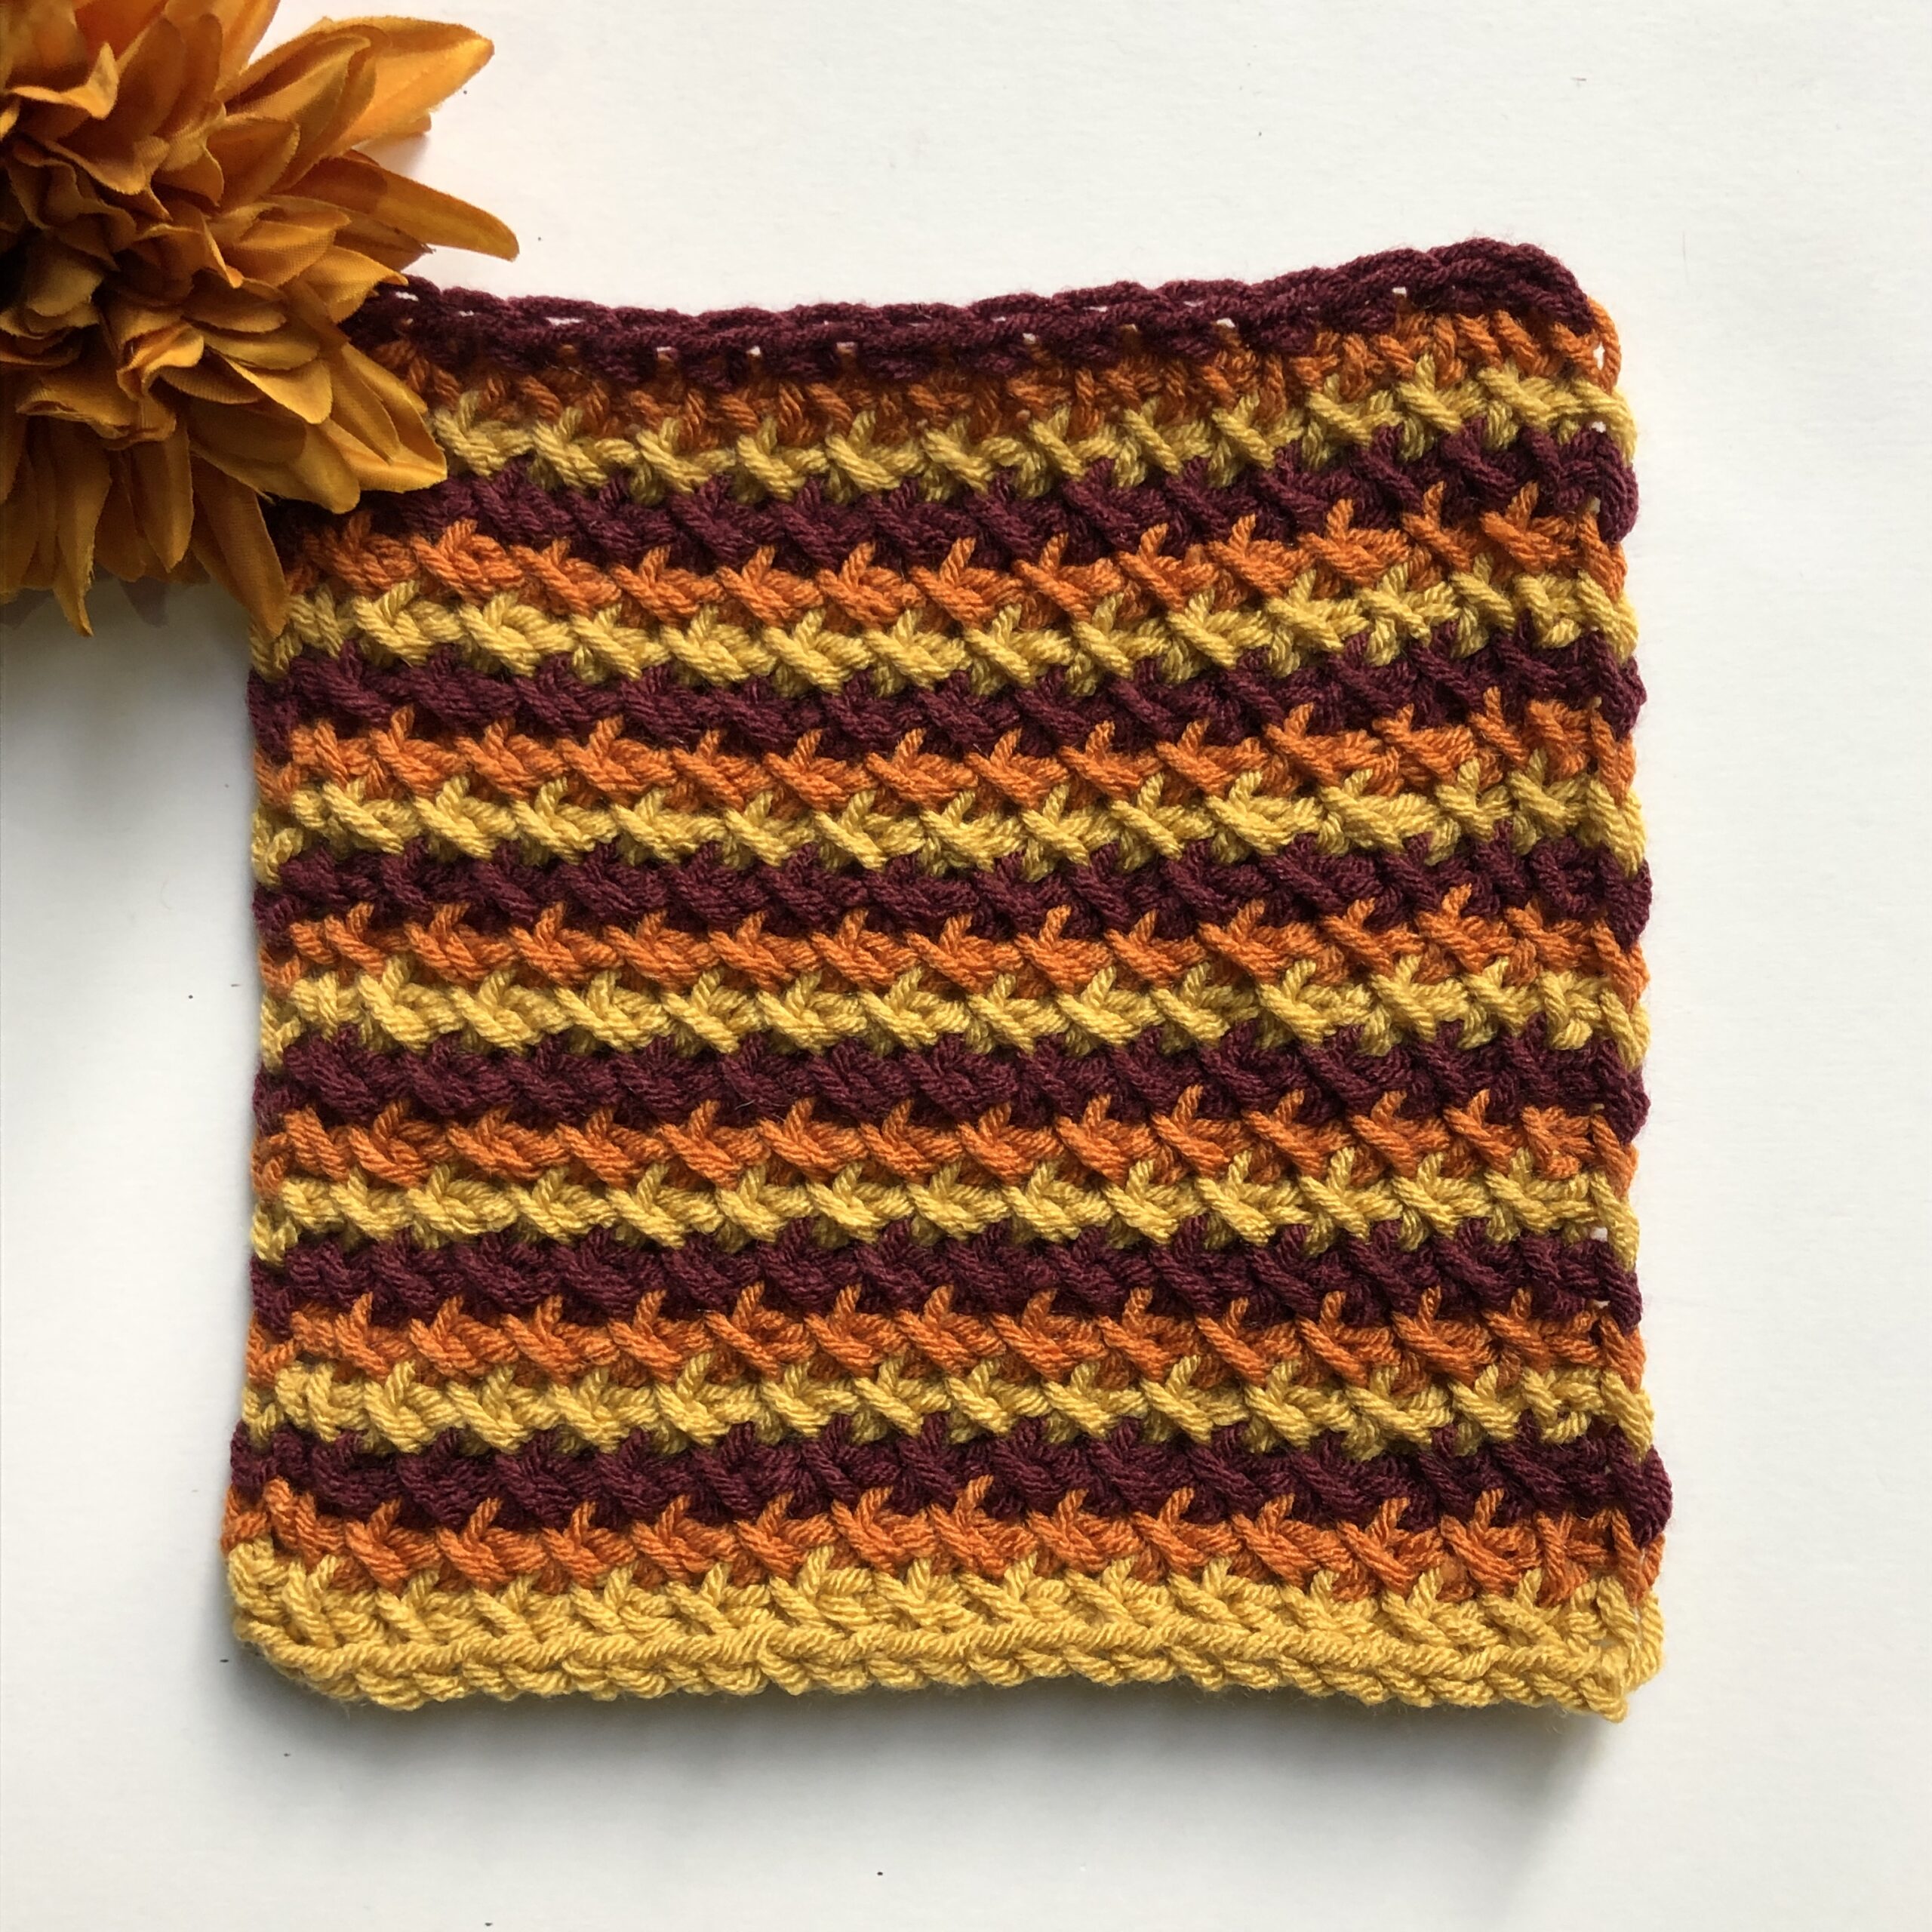 Tunisian blanket square in the colors of mulled wine.